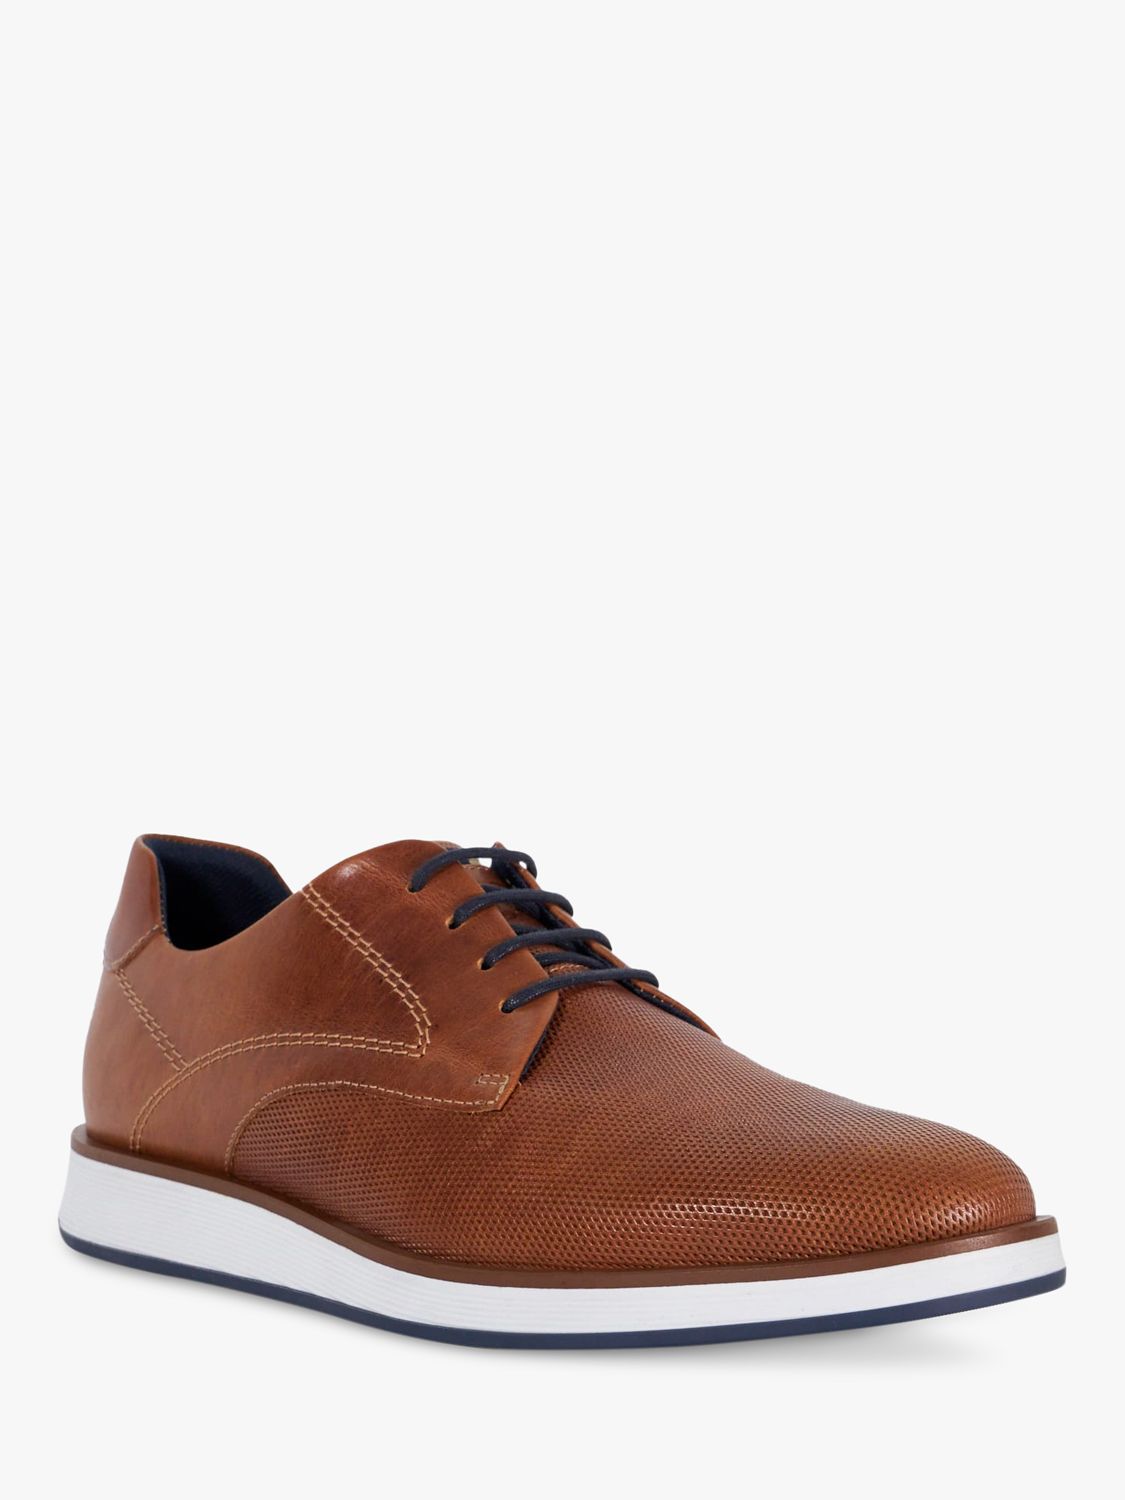 Buy Dune Beko Perforated Leather Gibson Shoes, Tan Online at johnlewis.com